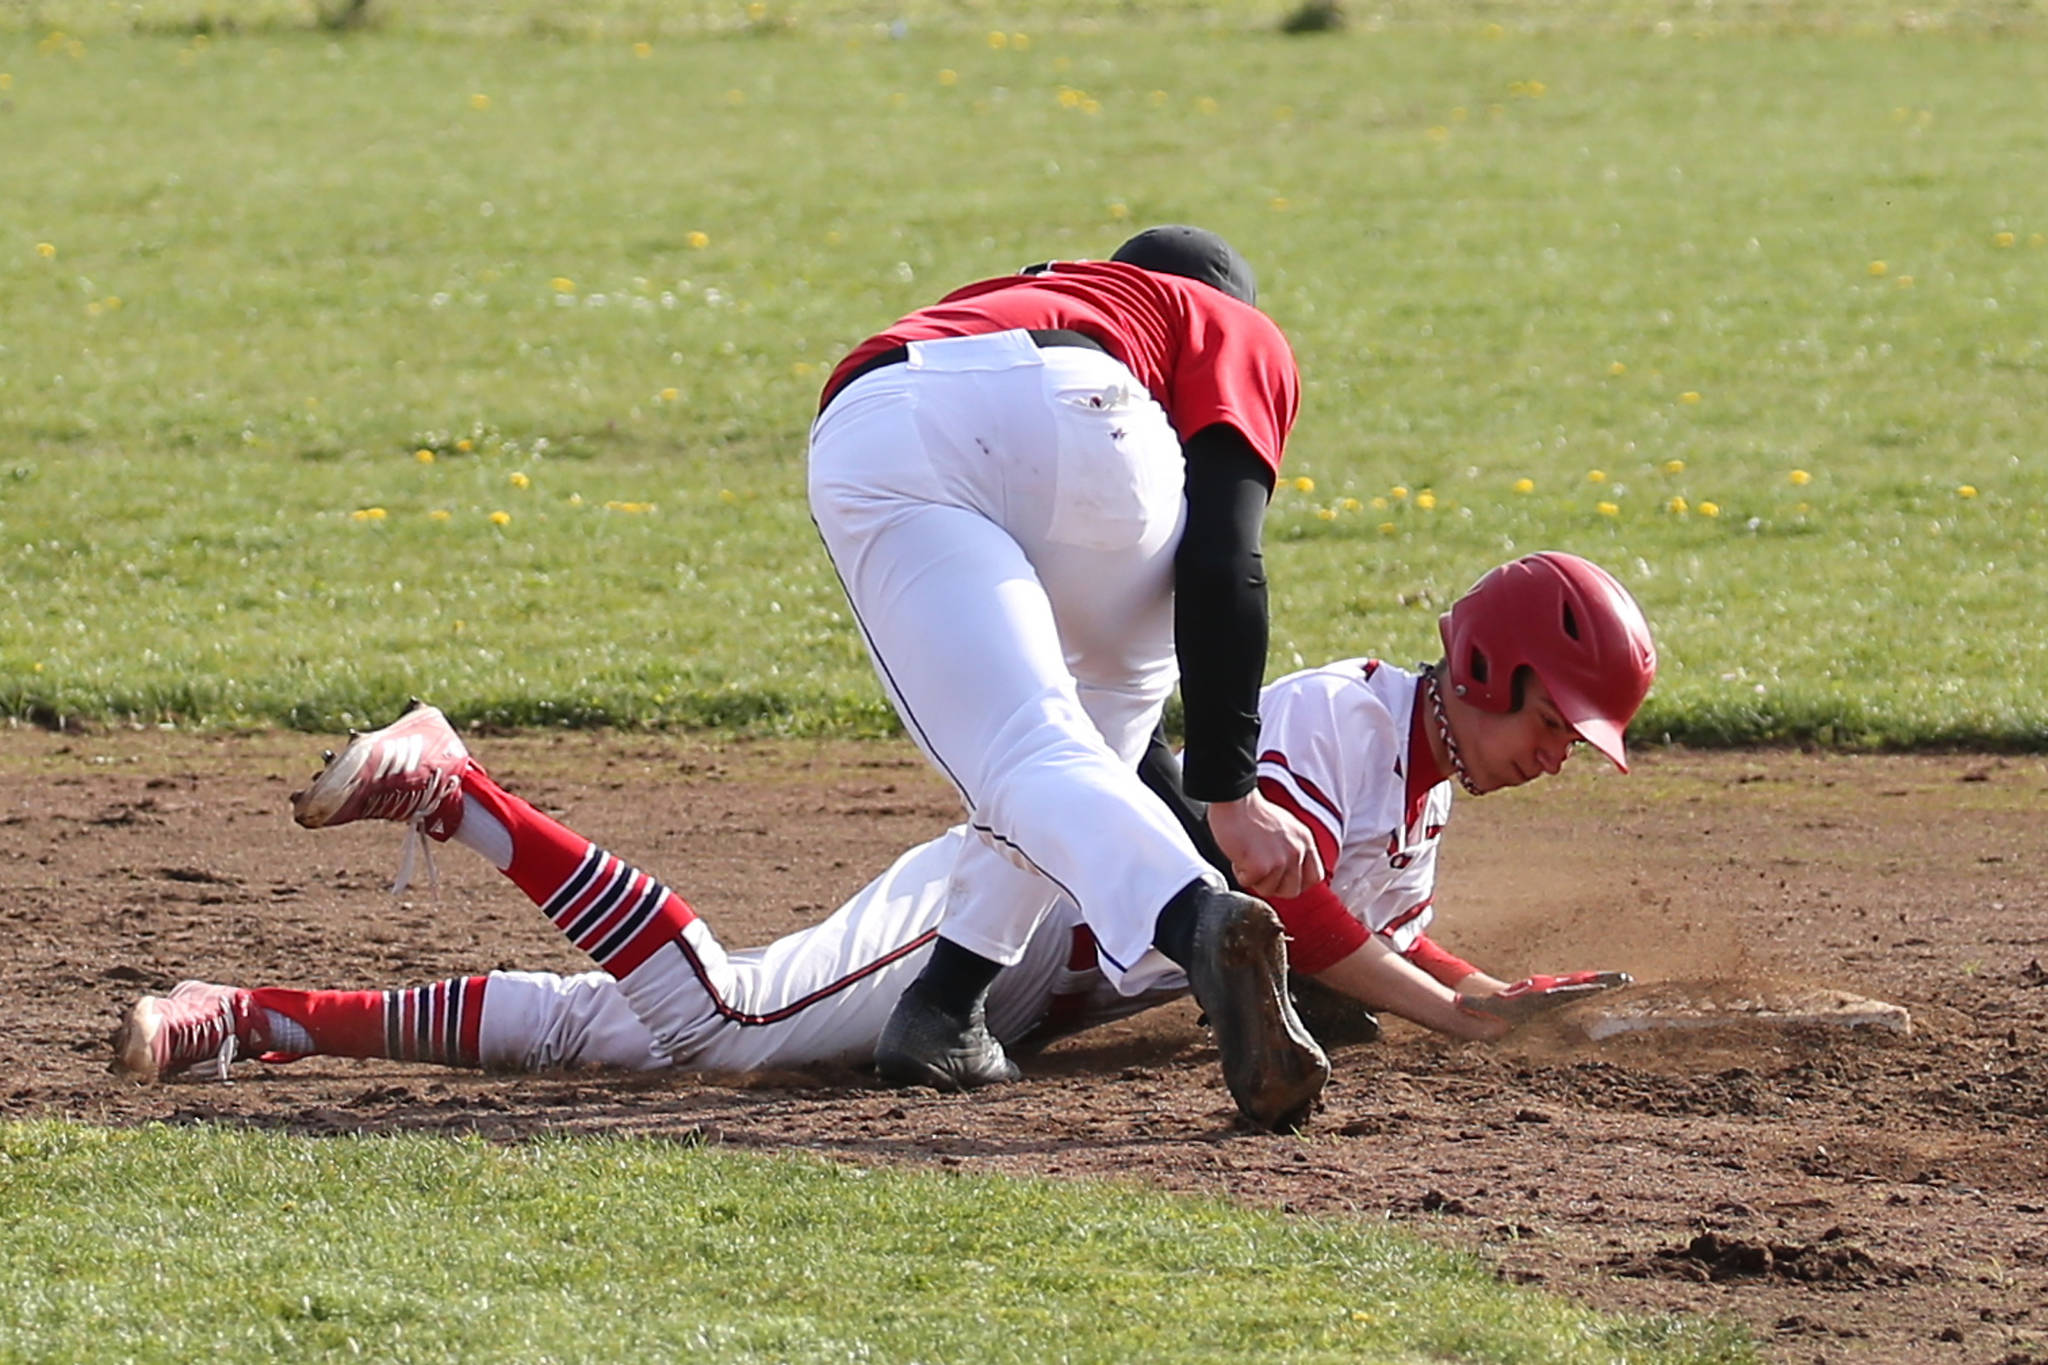 Coupeville’s Nick Etzell dives safely back into second base after a Port Townsend pickoff attempt. (Photo by John Fisken)